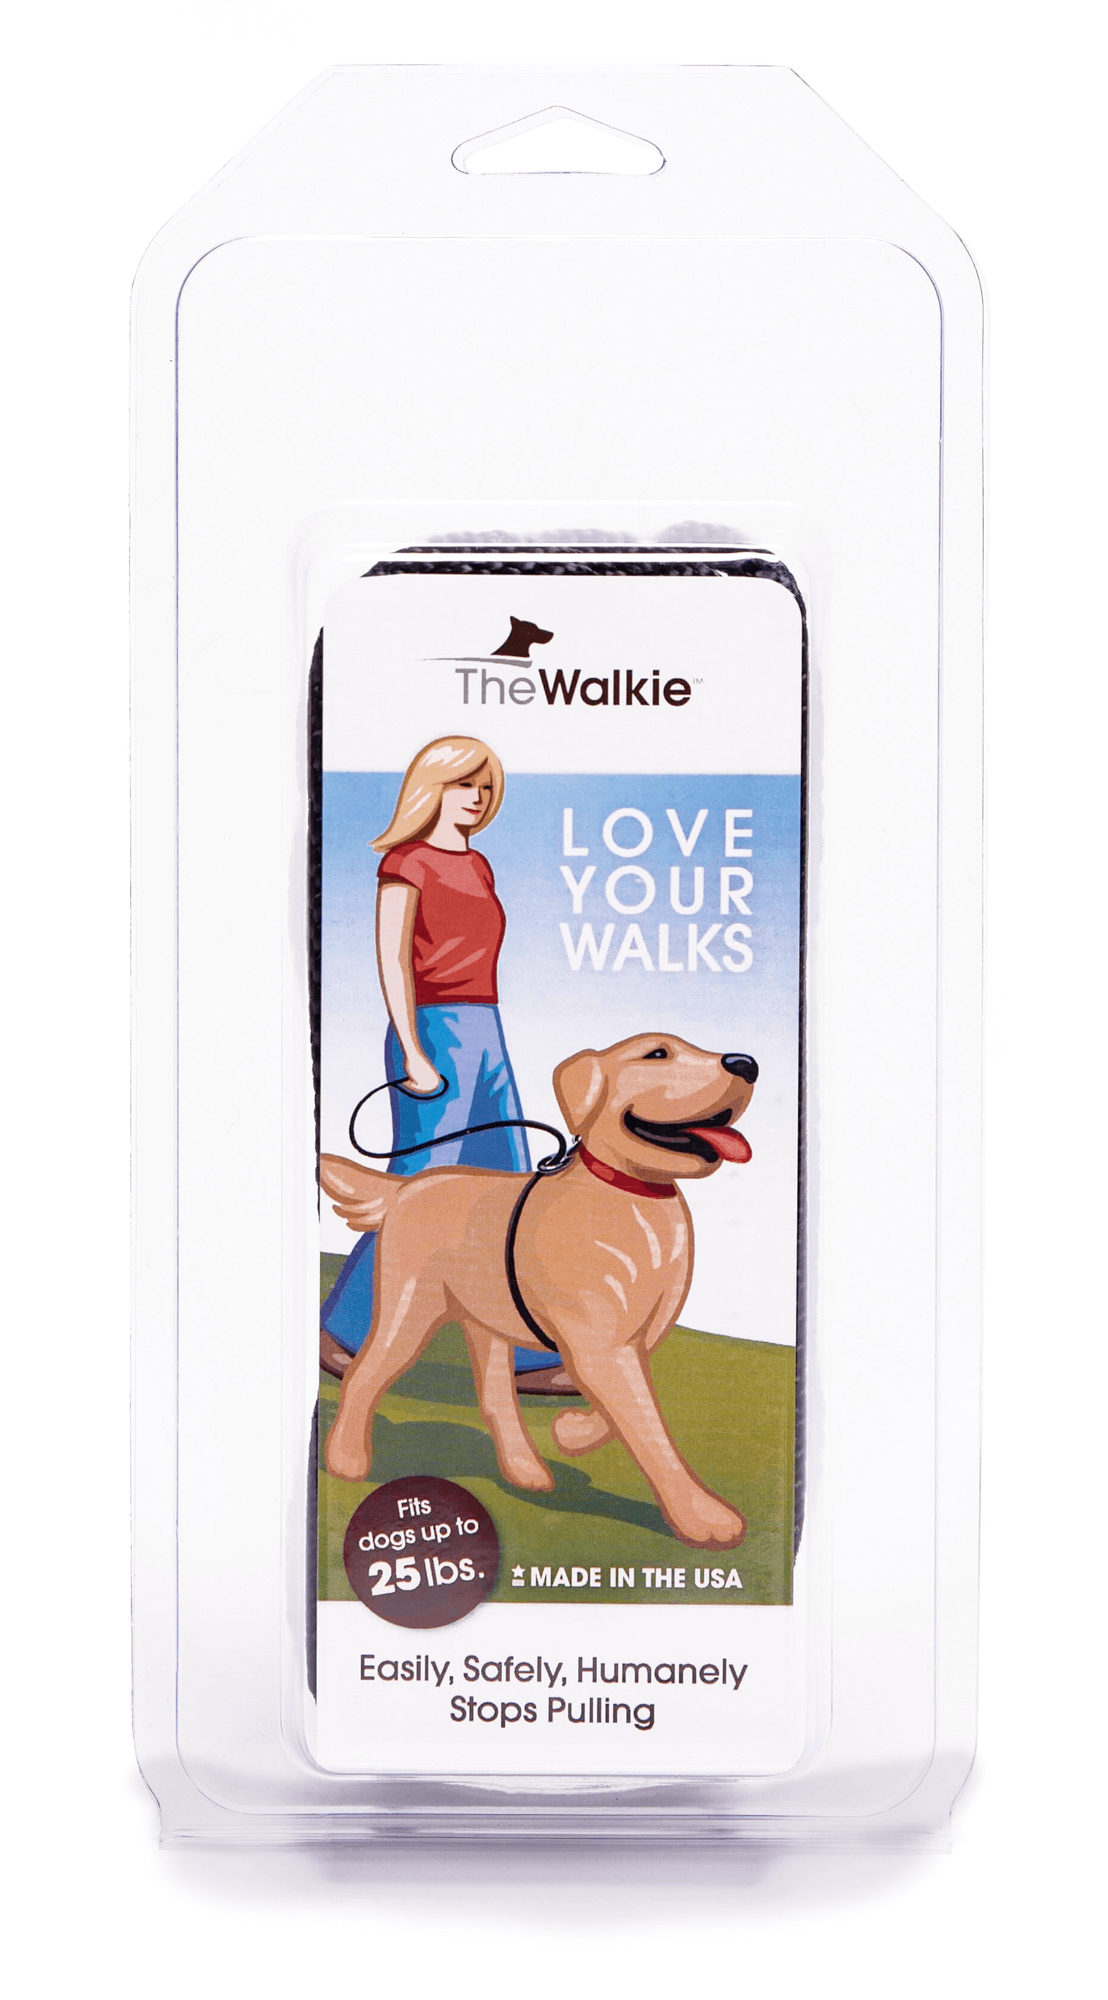 The Walkie packaging for smalls